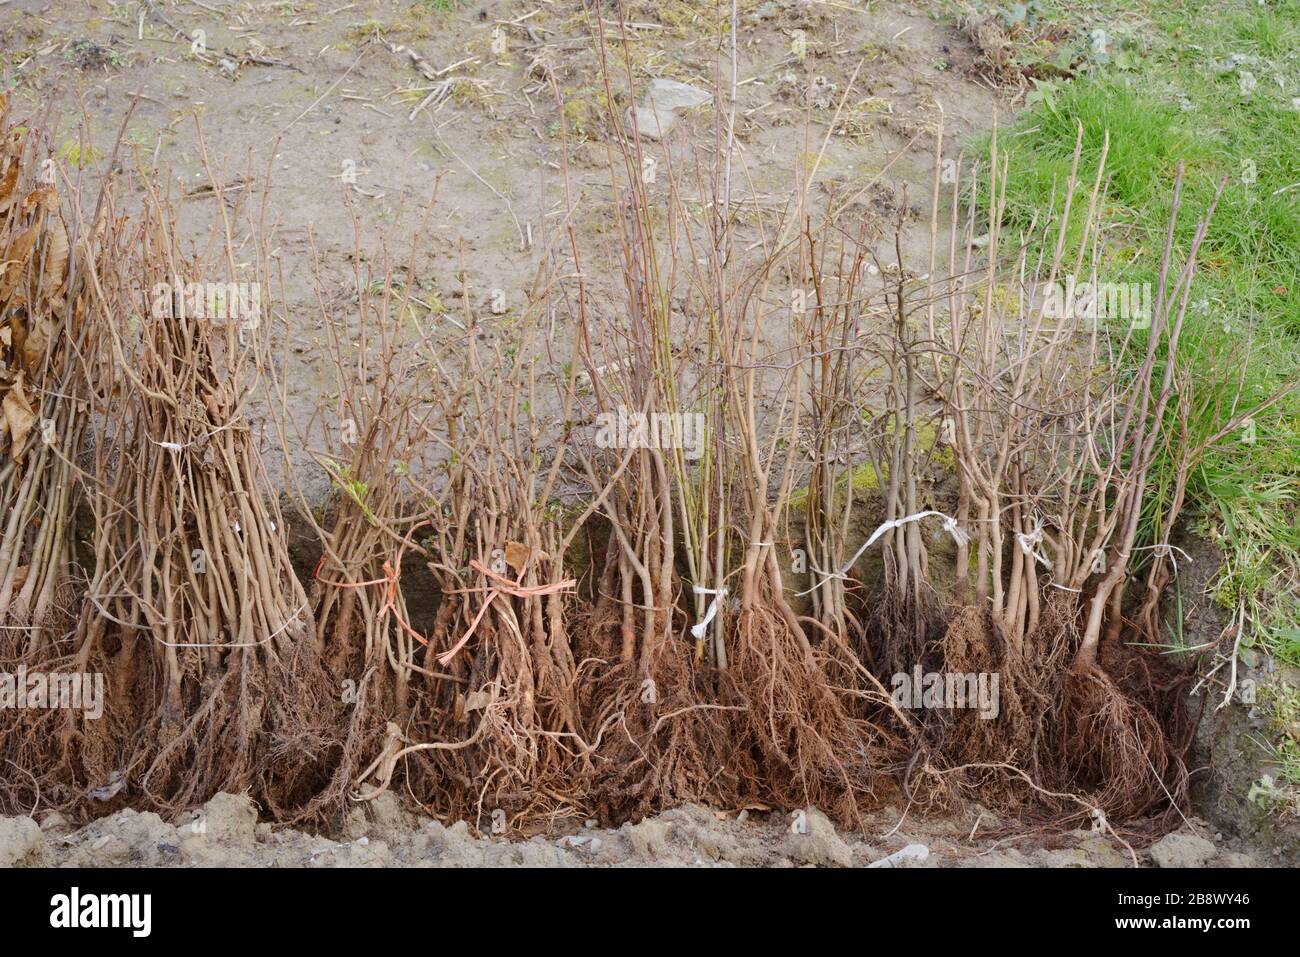 Bundles of native British trees, bare rooted planting stock, Wales, UK Stock Photo